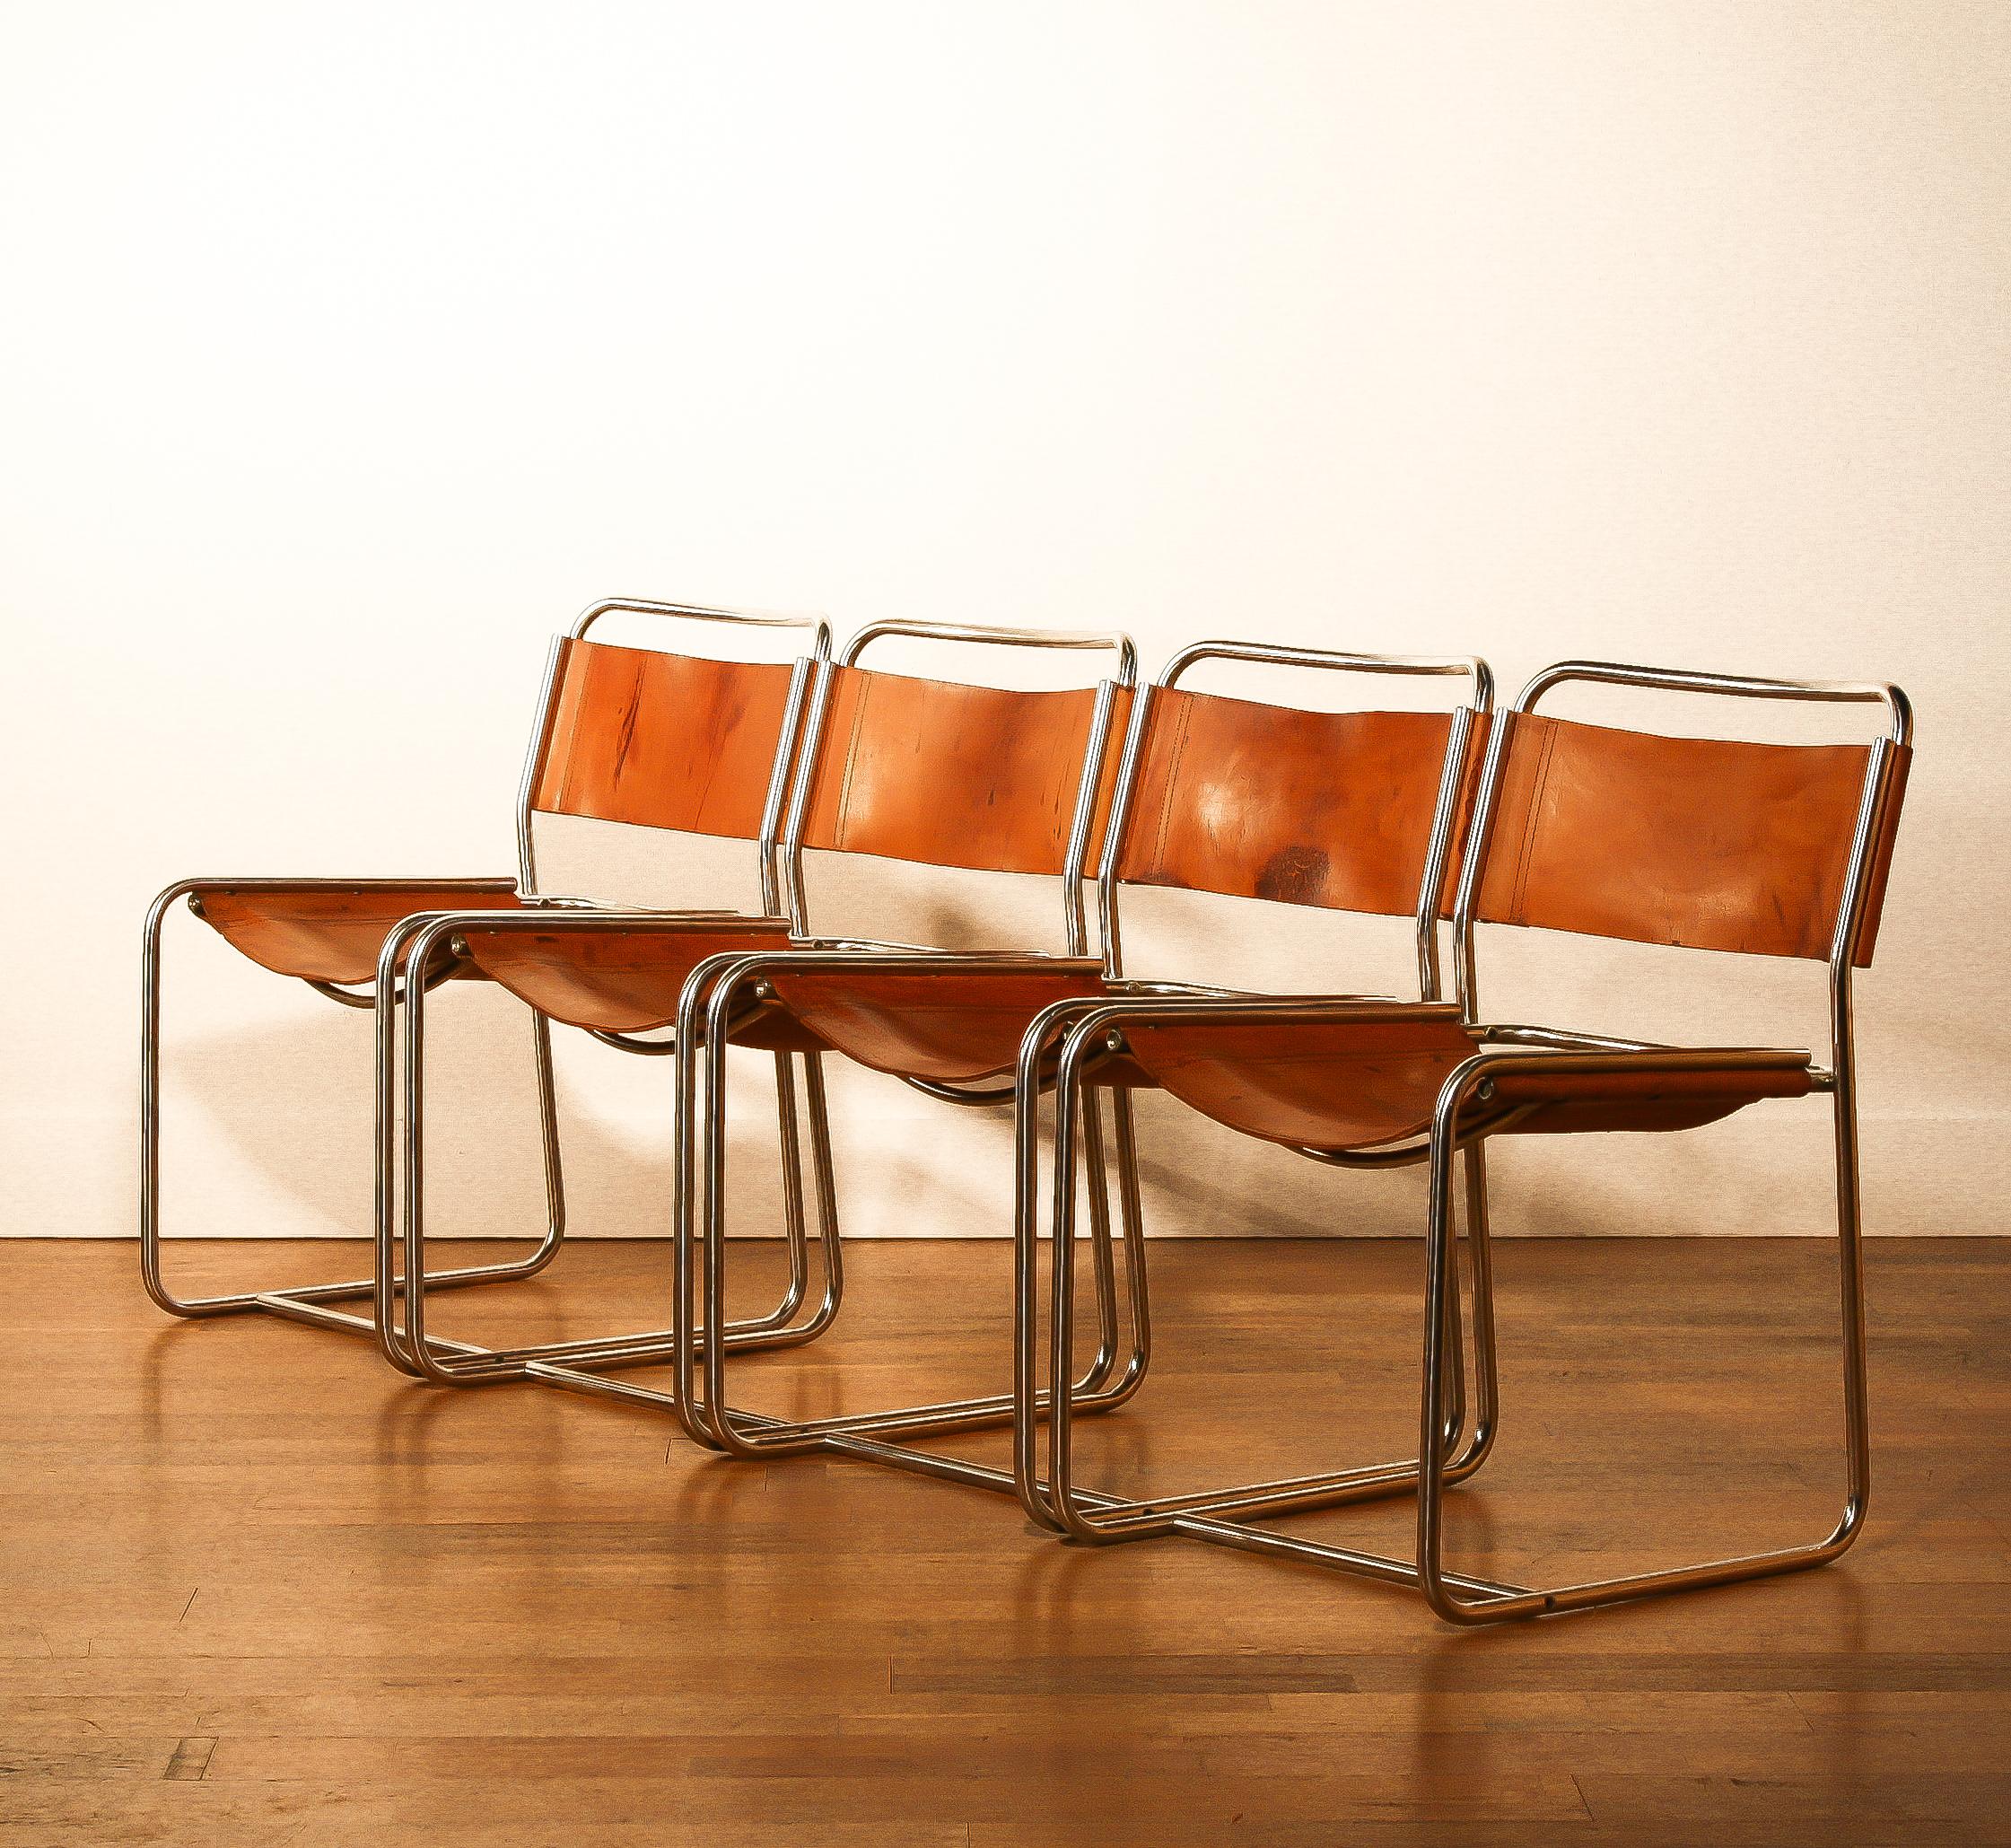 Late 20th Century Steel / Leather Set Dining Chairs by Paul Ibens & Clair Bataille for 't Spectrum